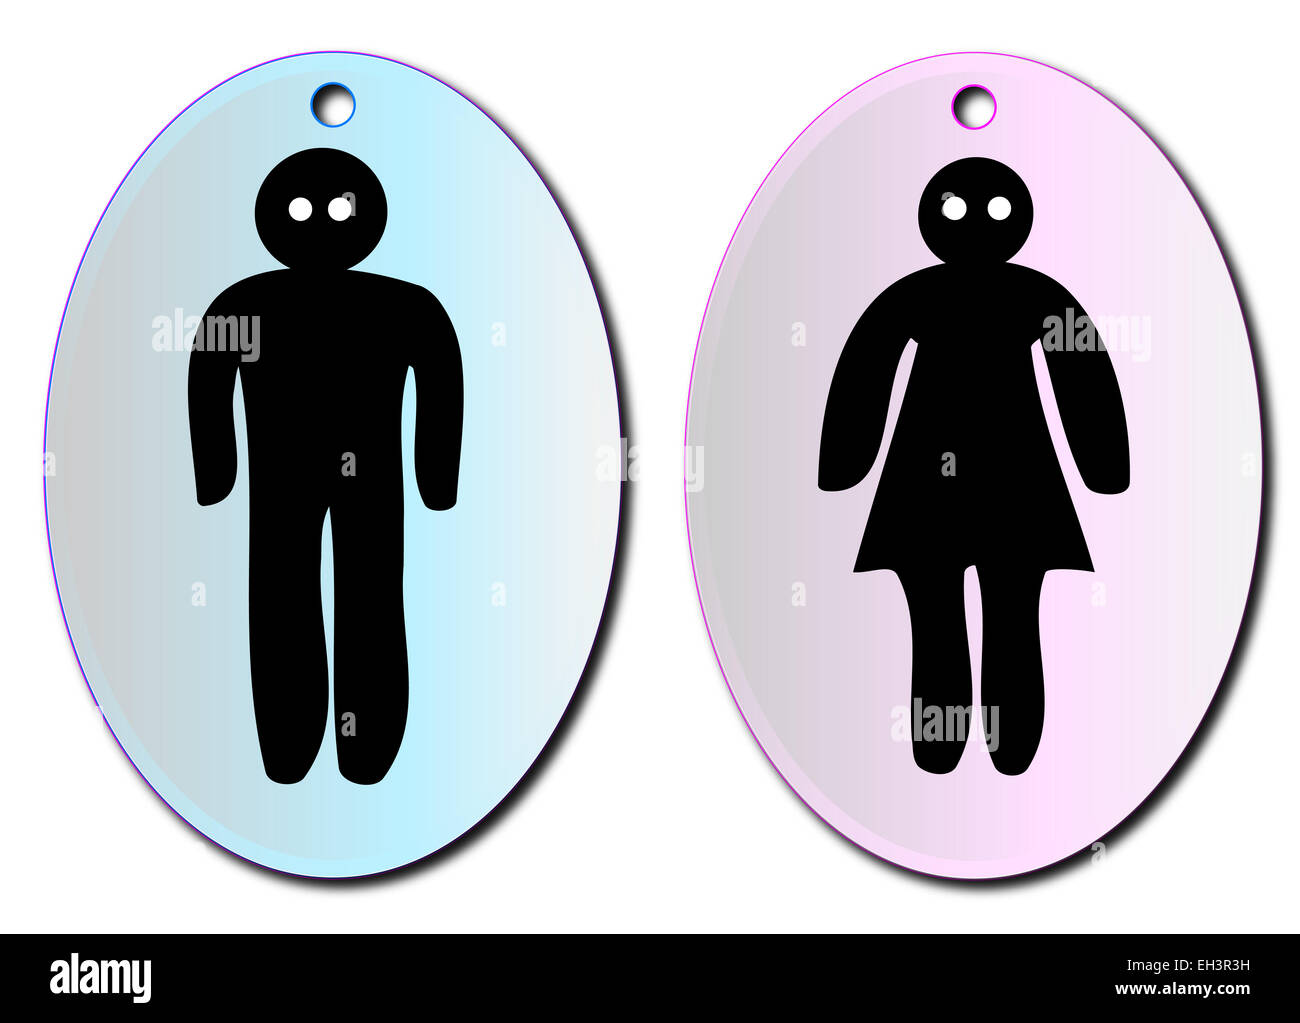 A pair of male and female toilet signs on white Stock Photo